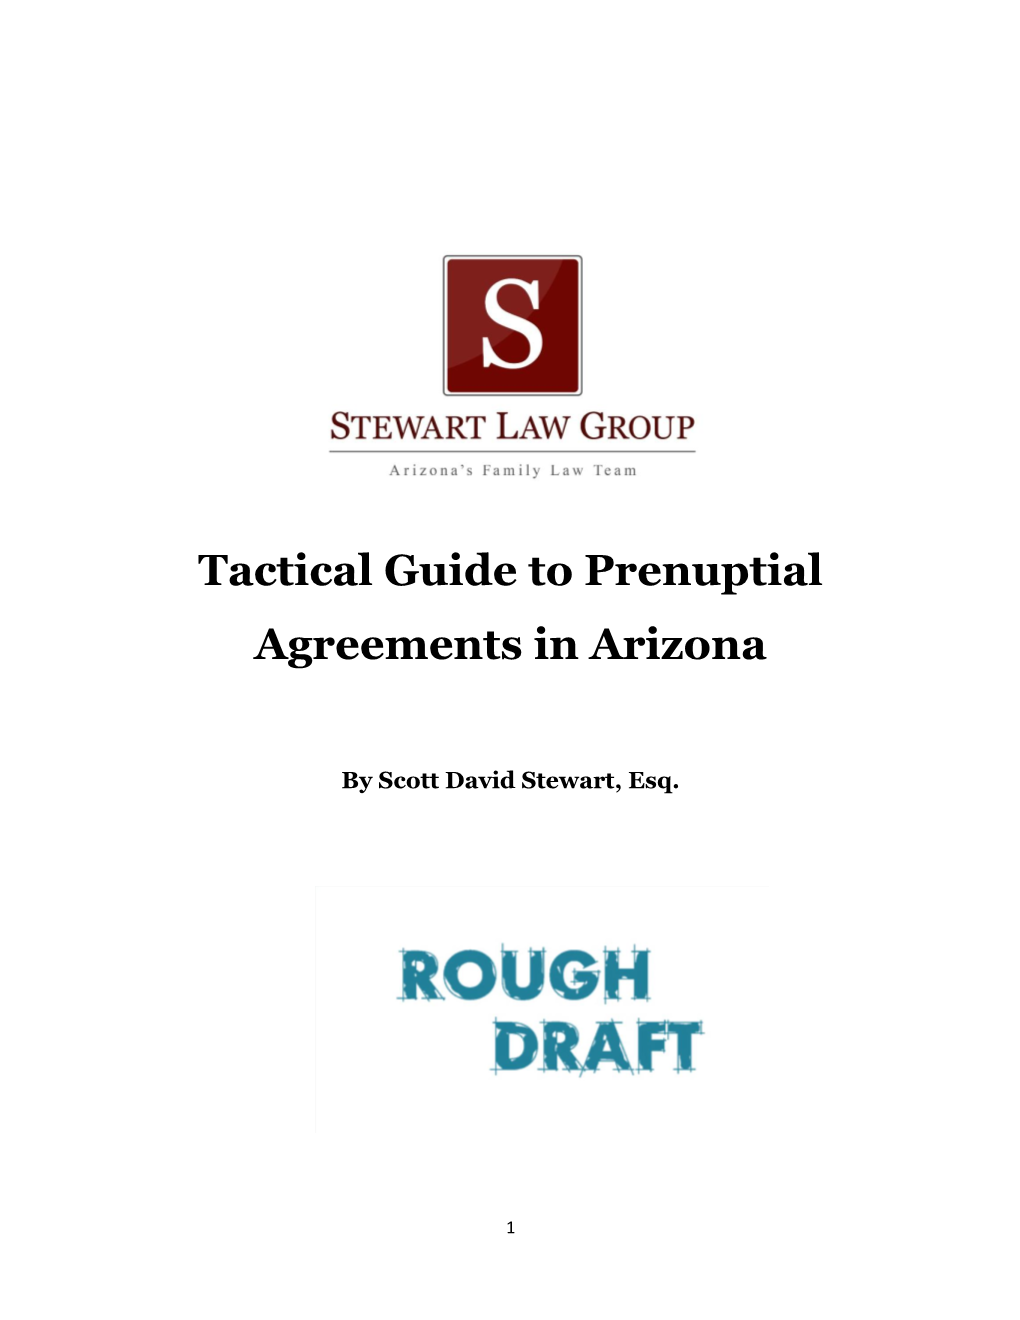 Tactical Guide to Prenuptial Agreements in Arizona